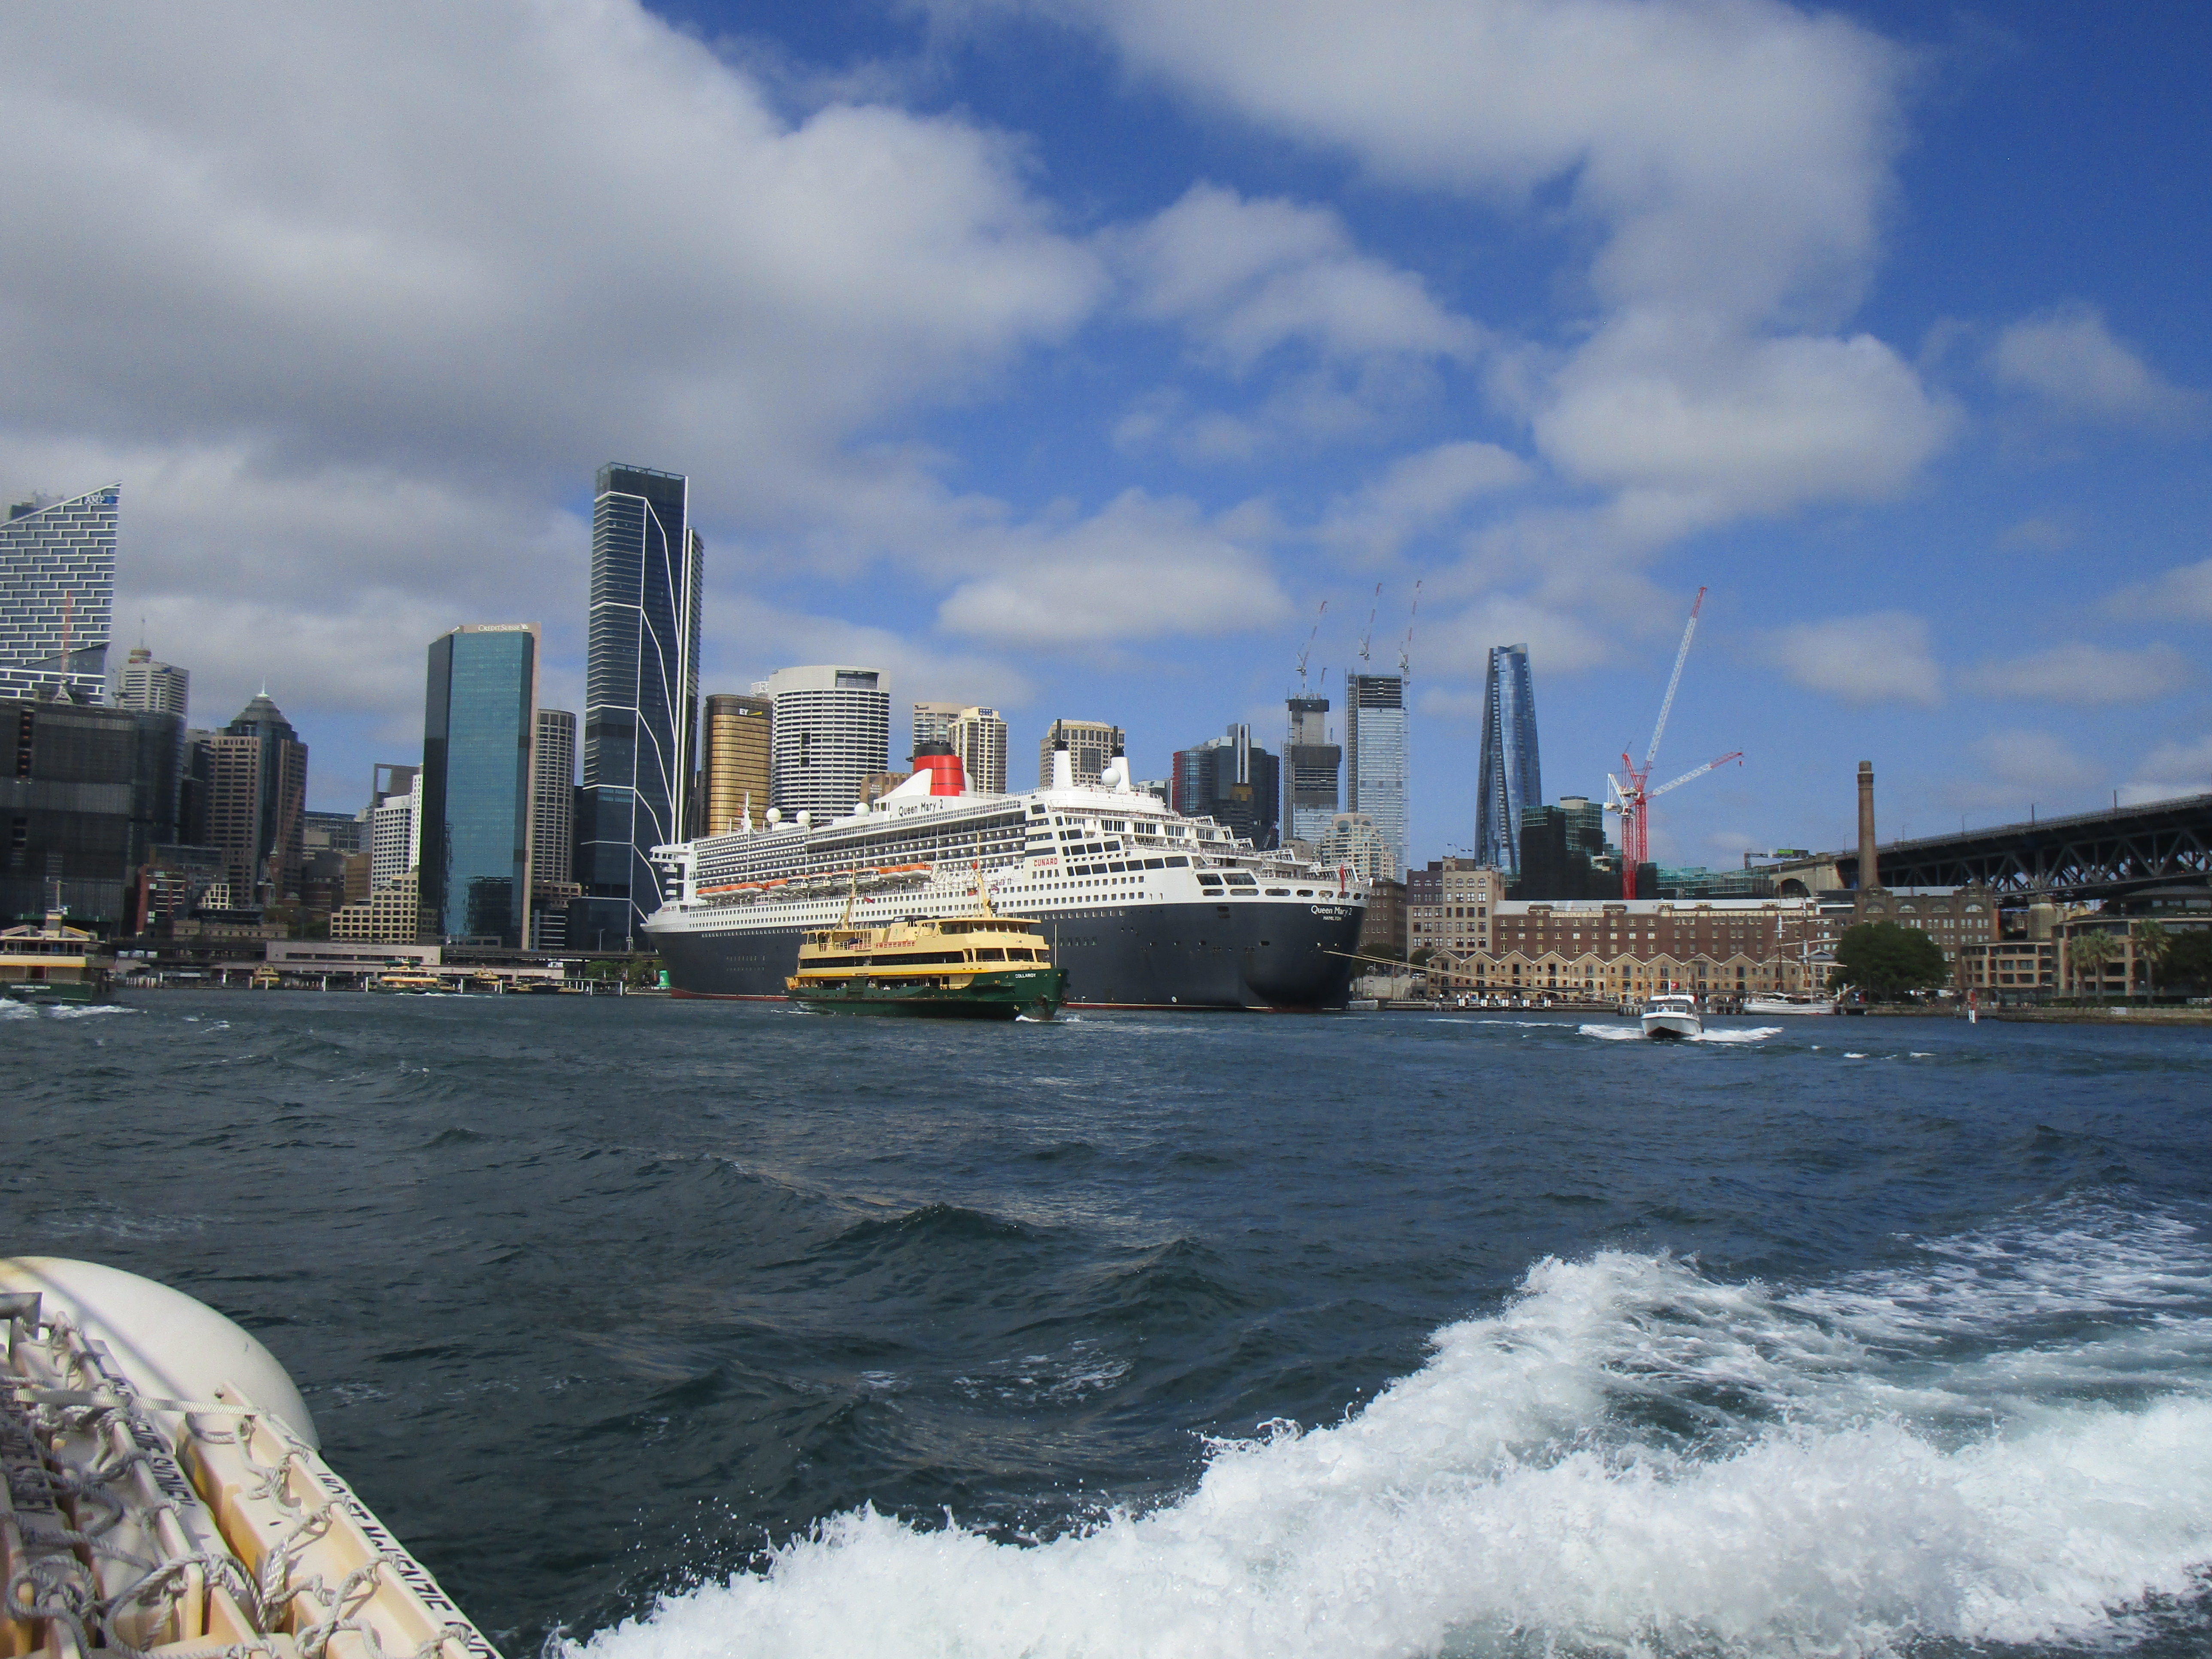 Ferry-to-Taronga-Zoo-12-Looking-at-Queen-Mary-2.JPG